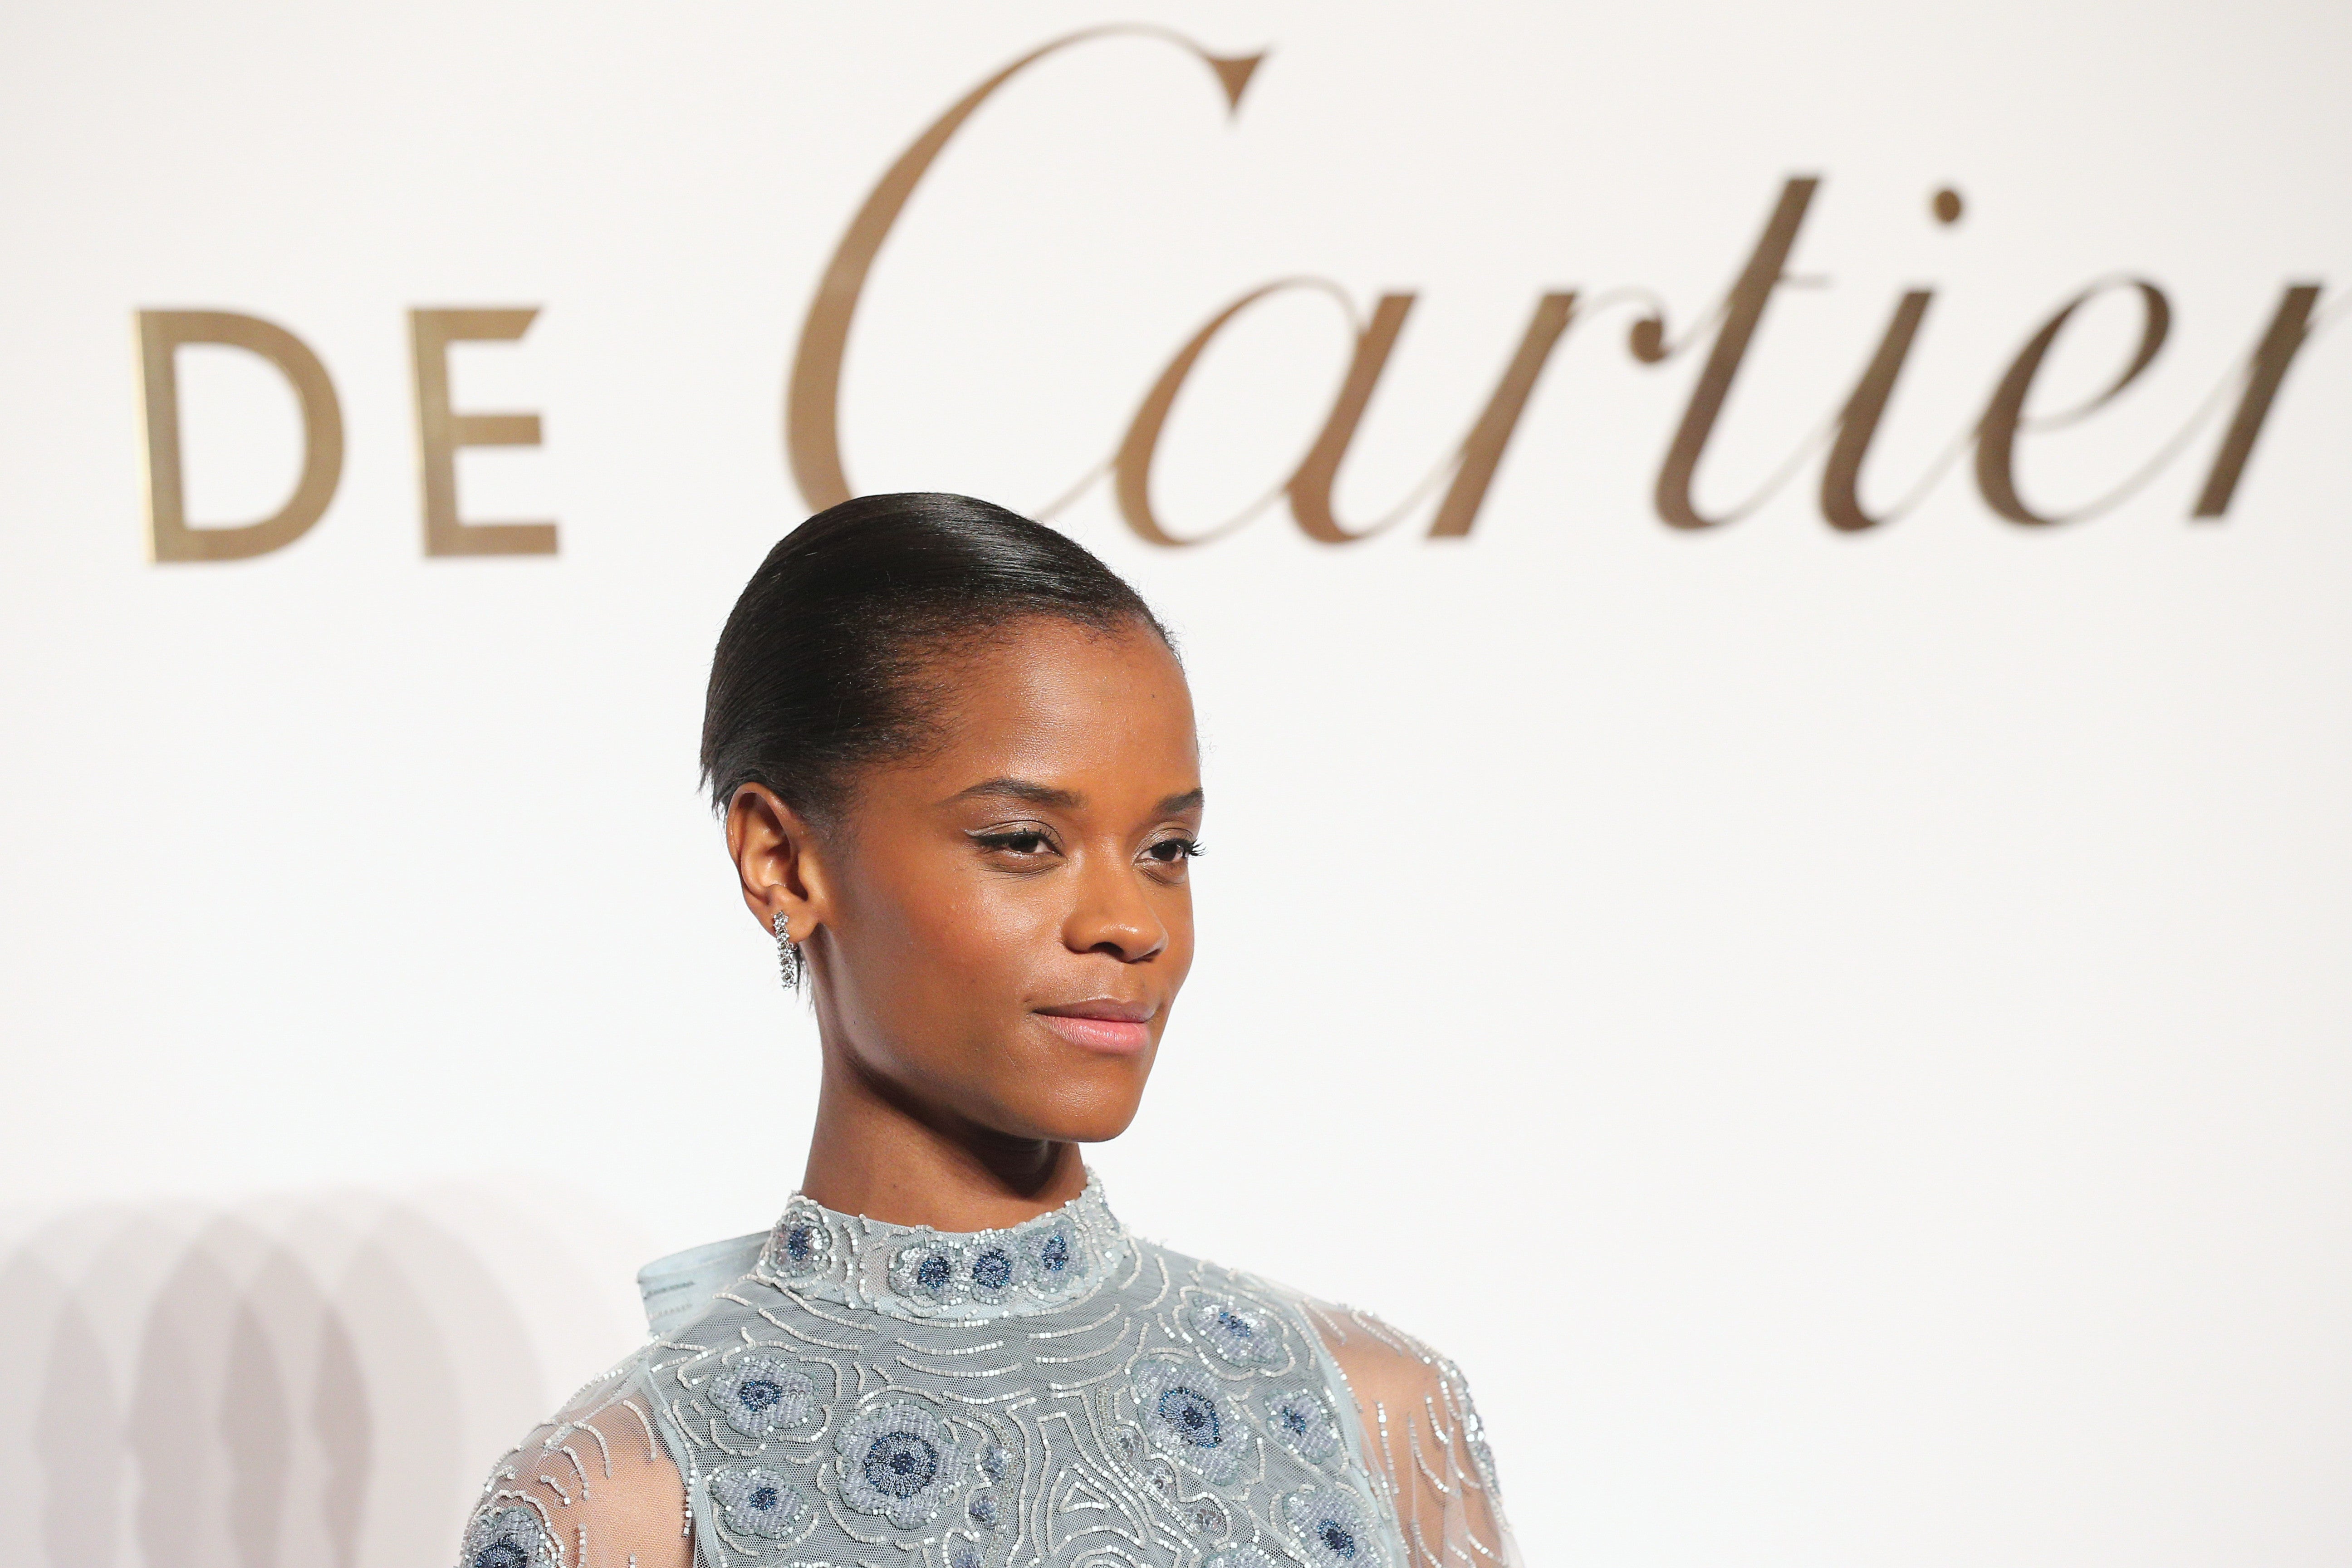 The Academy Adds Letitia Wright, Sterling K. Brown Plus Hundreds of Women And People of Color Members